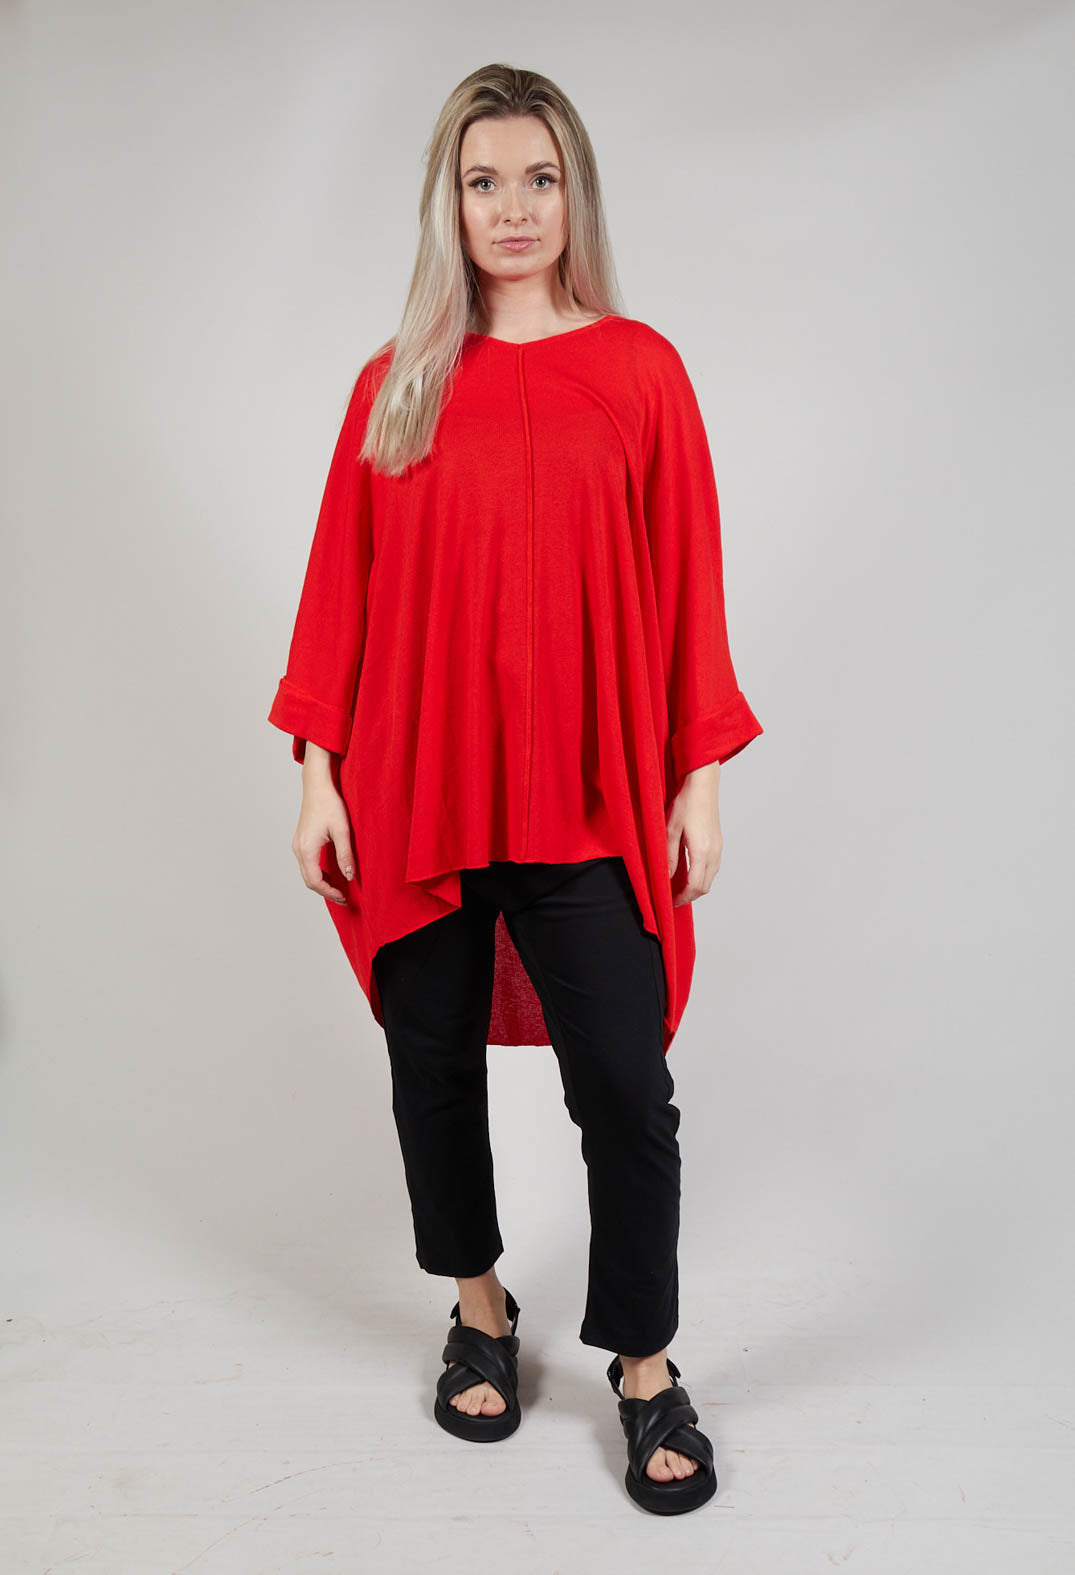 Oversized Knitted Tunic in Red